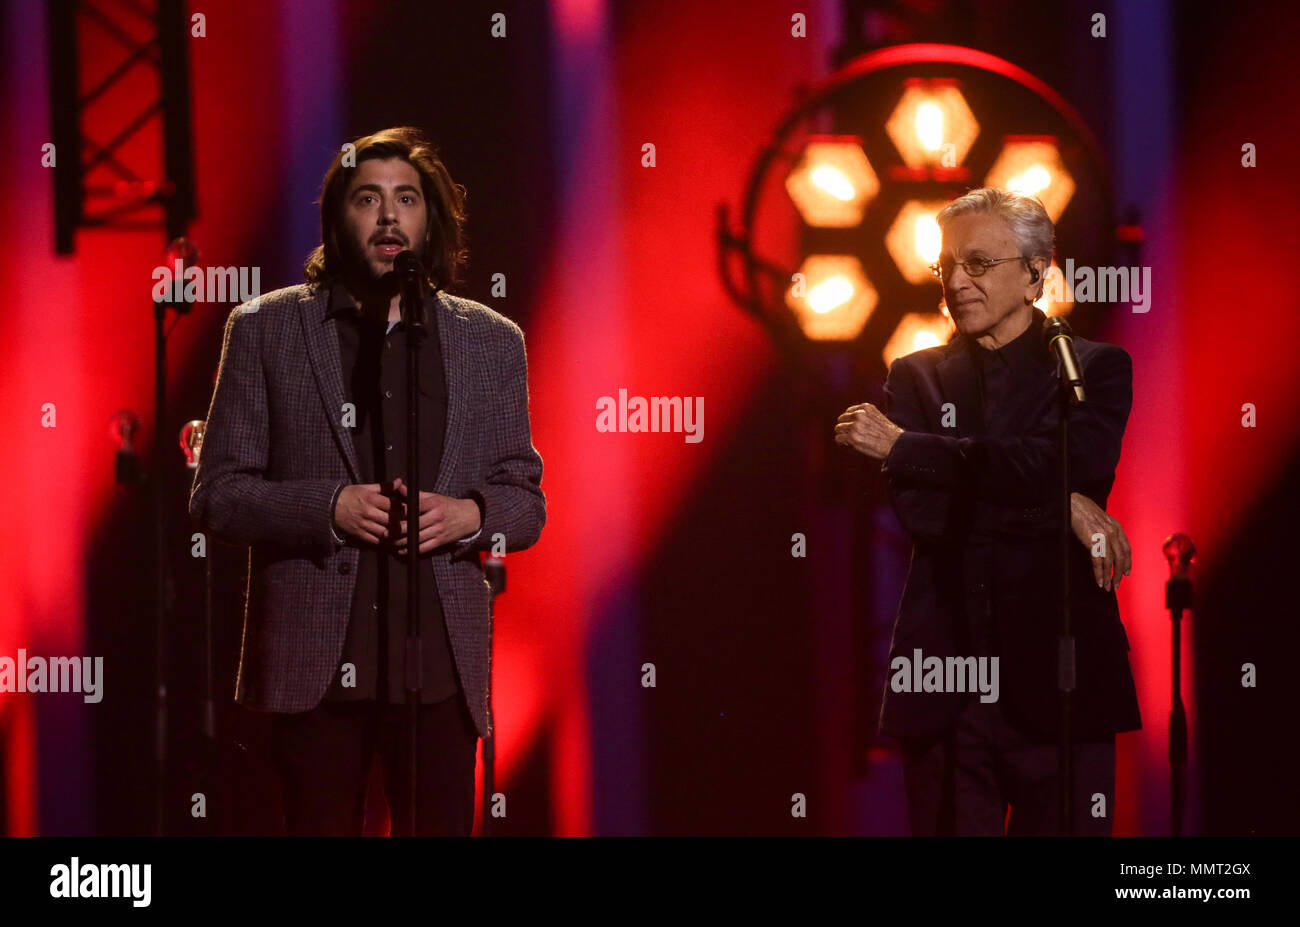 12 May 2018, Portugal, Lisbon: Last year's winner Salvador Sobral (l) and Brazilian singer Caetano Veloso perform at the finals of the 63rd Eurovision Song Contest. Photo: Jörg Carstensen/dpa Stock Photo